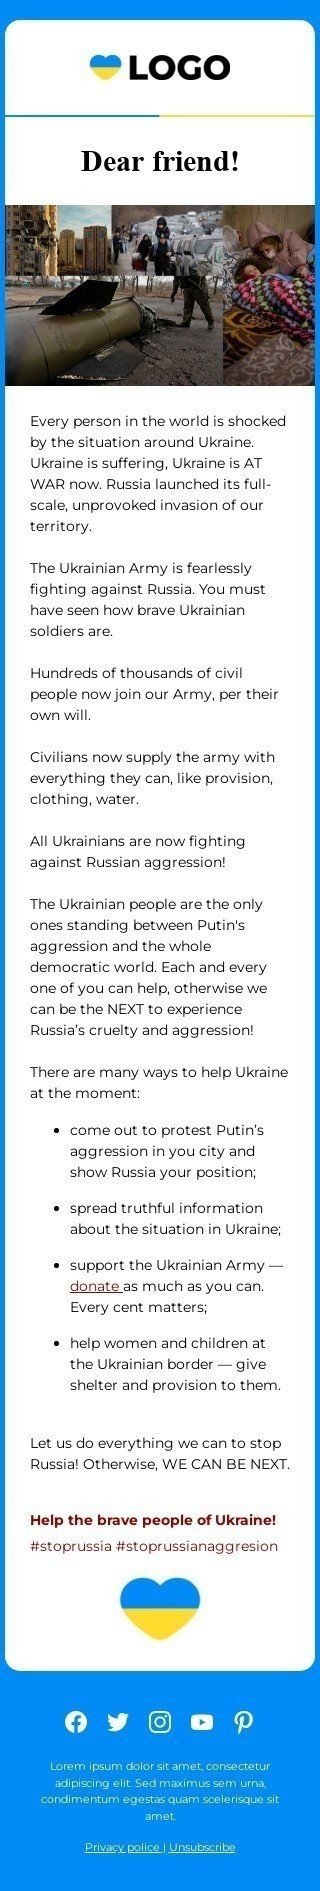 The "Spread a word Russian Aggression in Ukraine" email template mobile view